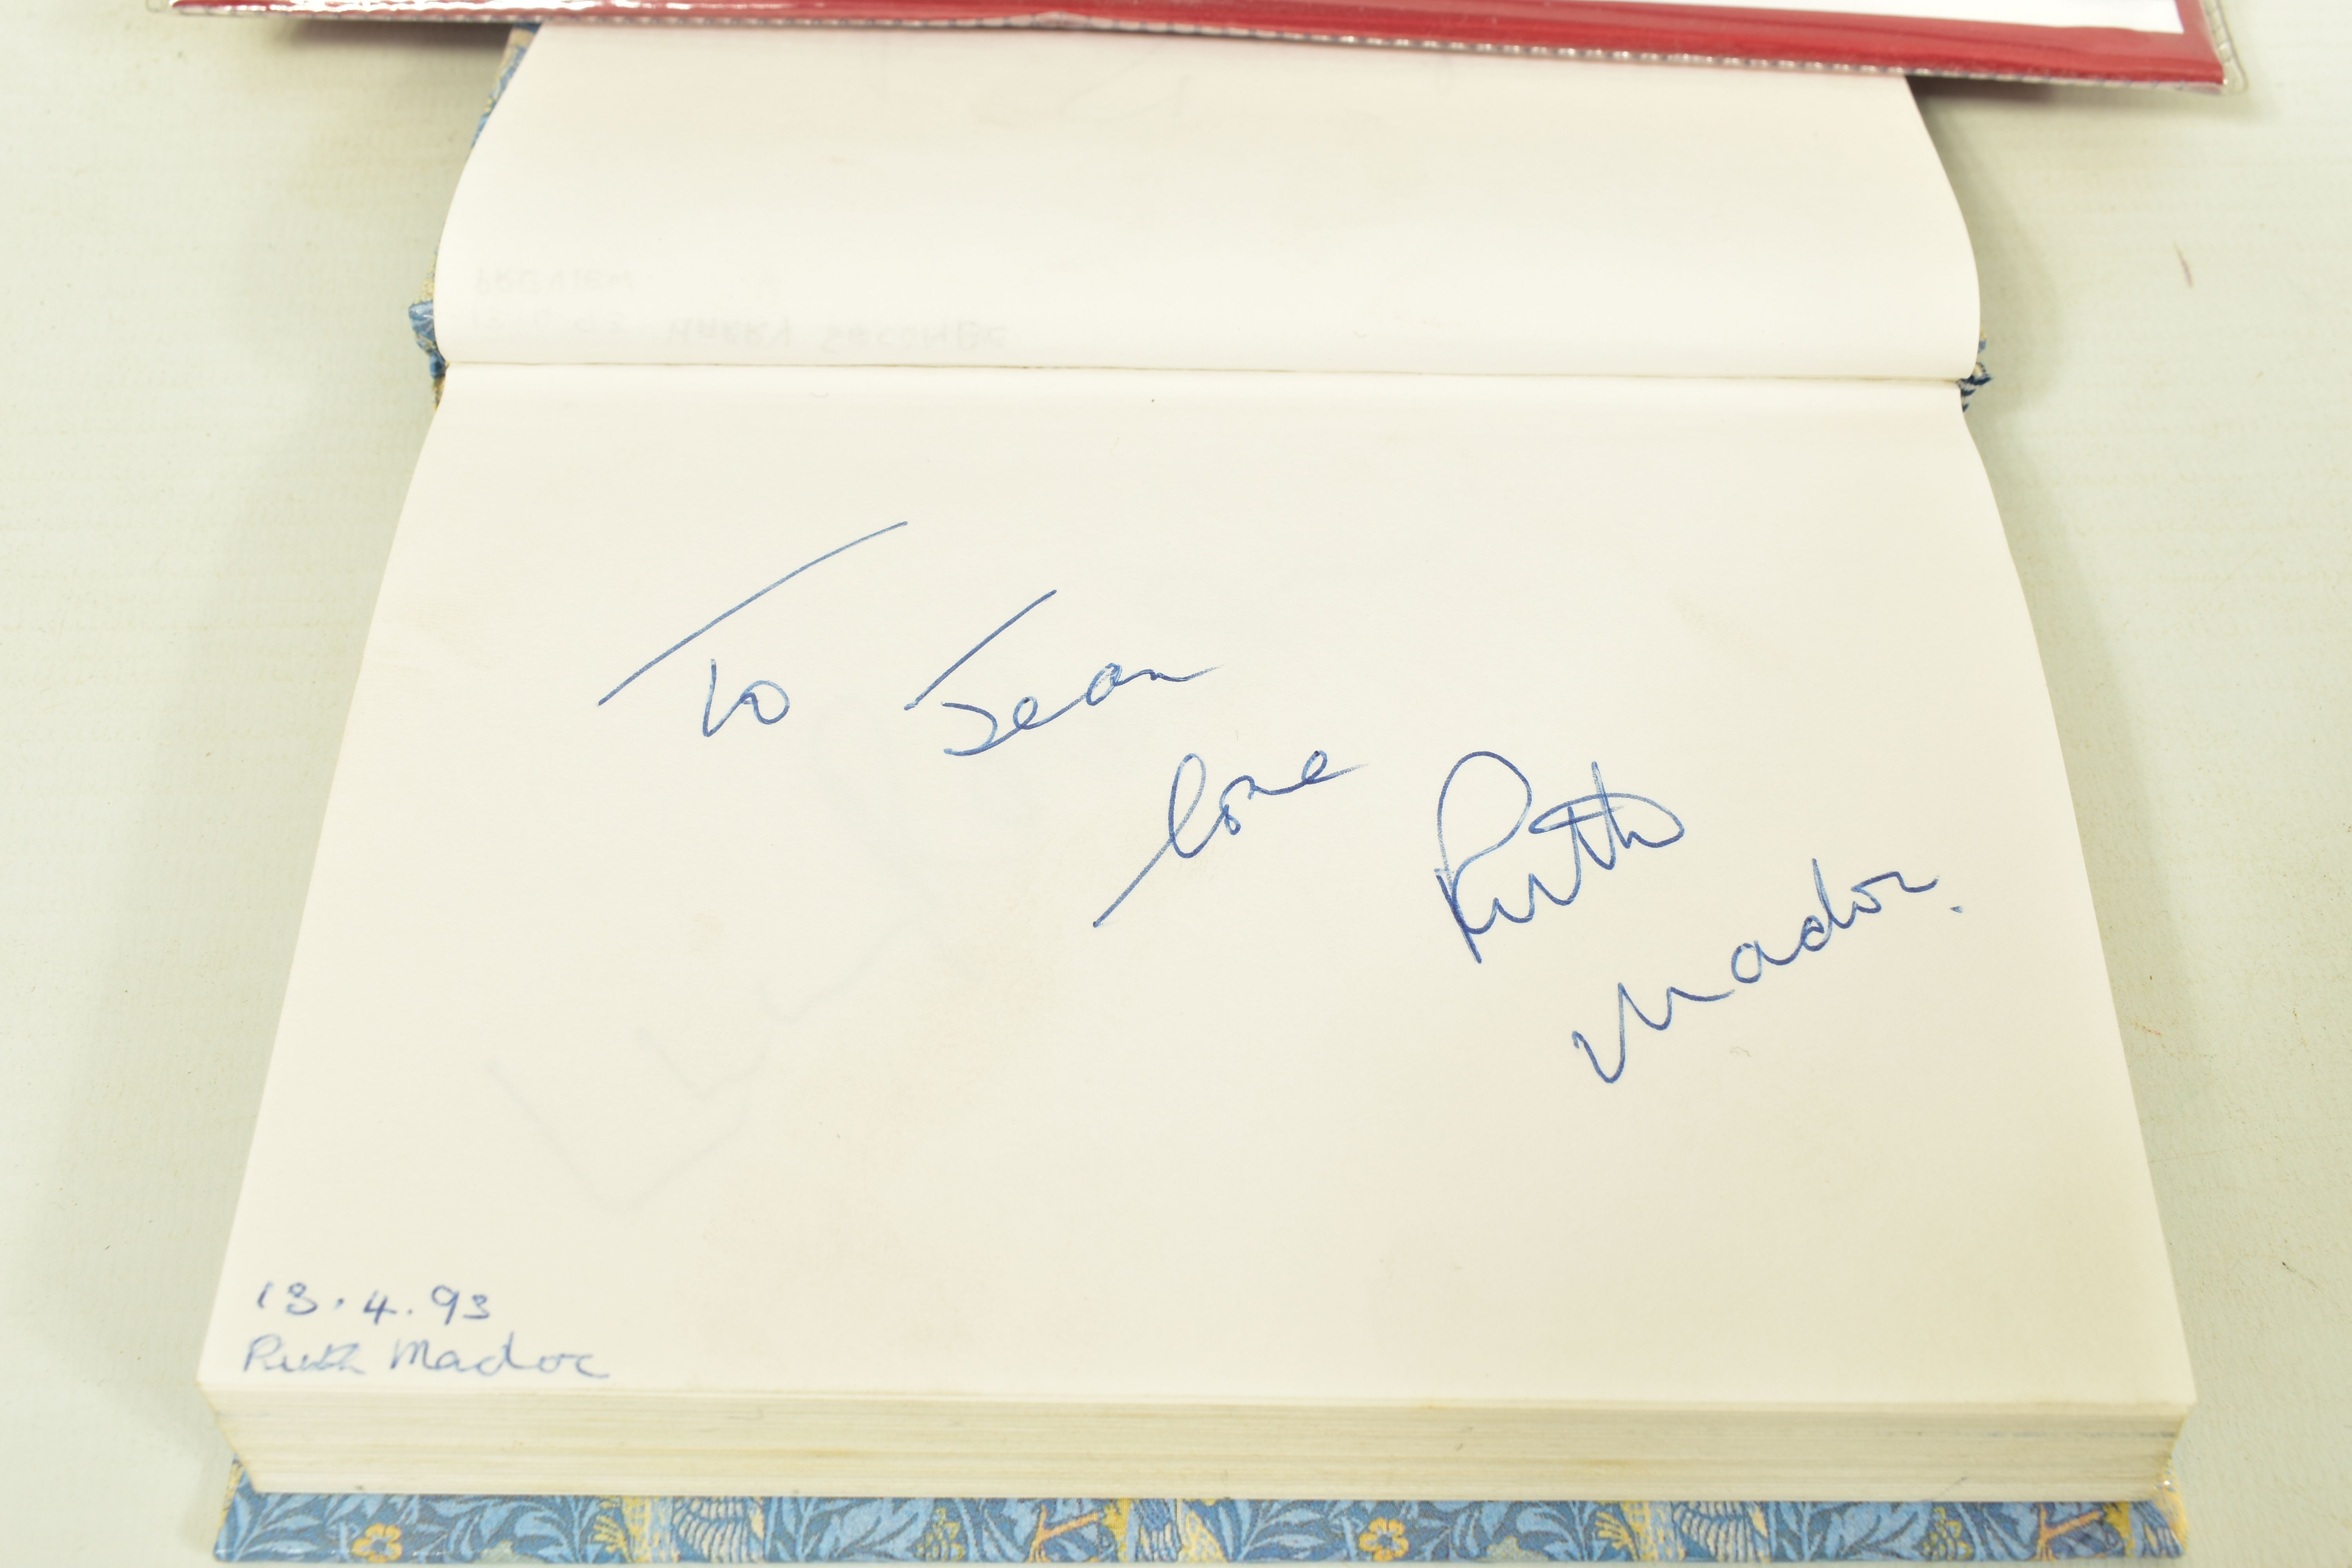 FILM, TELEVISION & STAGE AUTOGRAPH ALBUM & PHOTOGRAPHS, a collection featuring one album of - Image 11 of 17